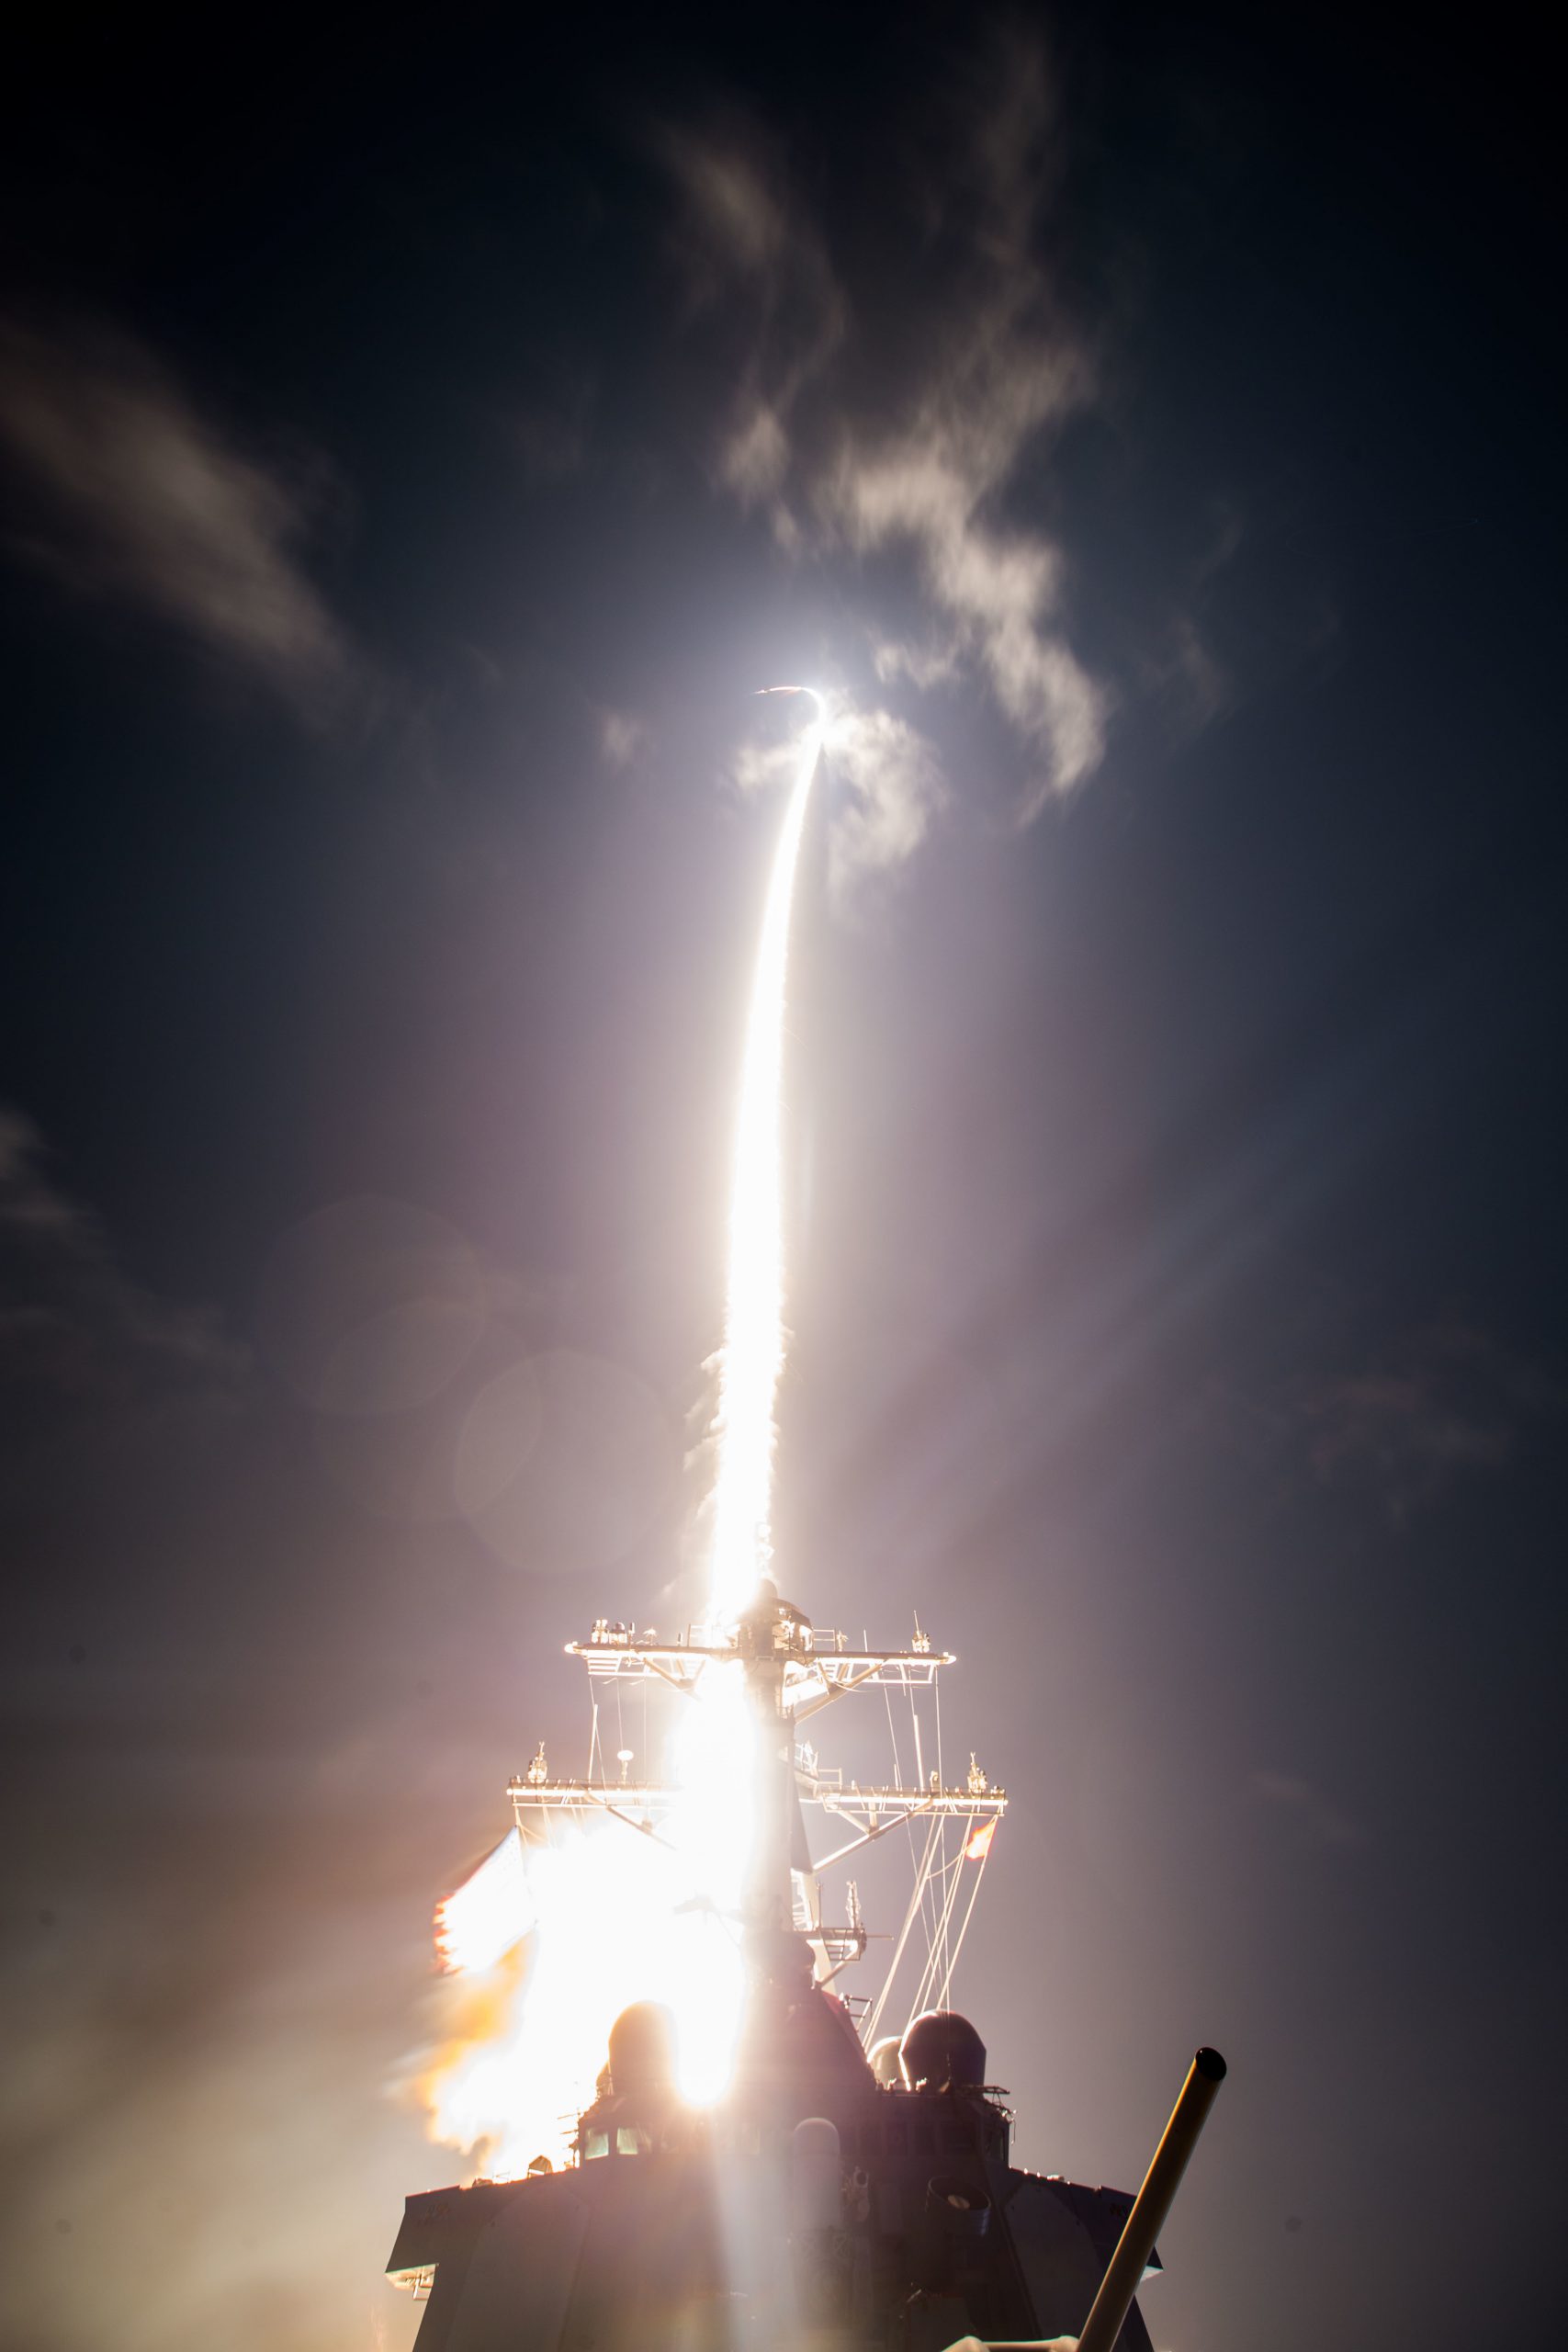 U.S. Missile Defense Agency personnel, sailors aboard the USS John Paul Jones and members of Japan’s defense ministry conduct a flight test off the west coast of Hawaii, Feb. 3, 2017. The test resulted in the first intercept of a ballistic missile target using the Standard Missile-3 Block IIA. DoD photo by Leah Garton. -